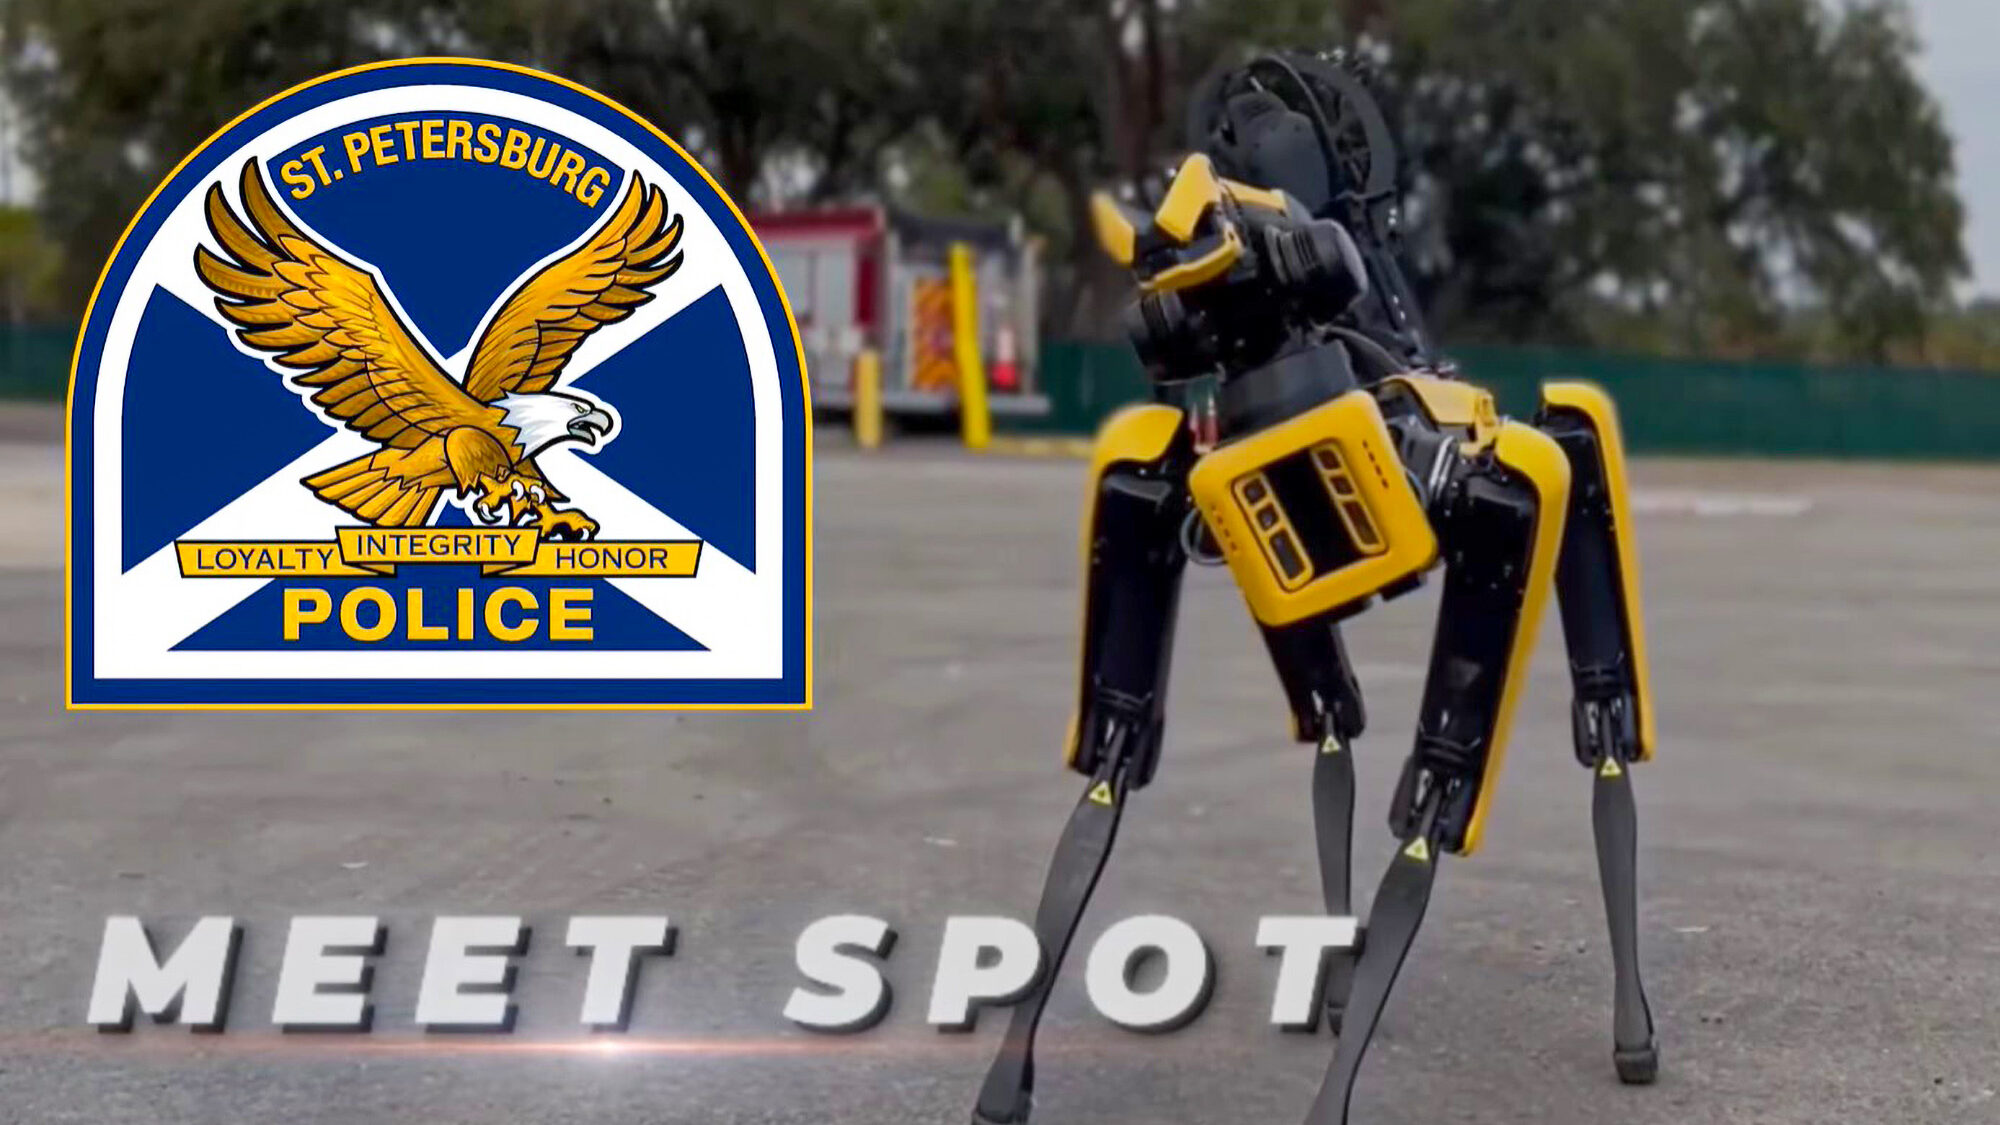 The newest member of the St. Petersburg Police Department, SPOT the remote-control robotic dog, is seen in this screenshot from a video. (St. Petersburg Police Department/Zenger)